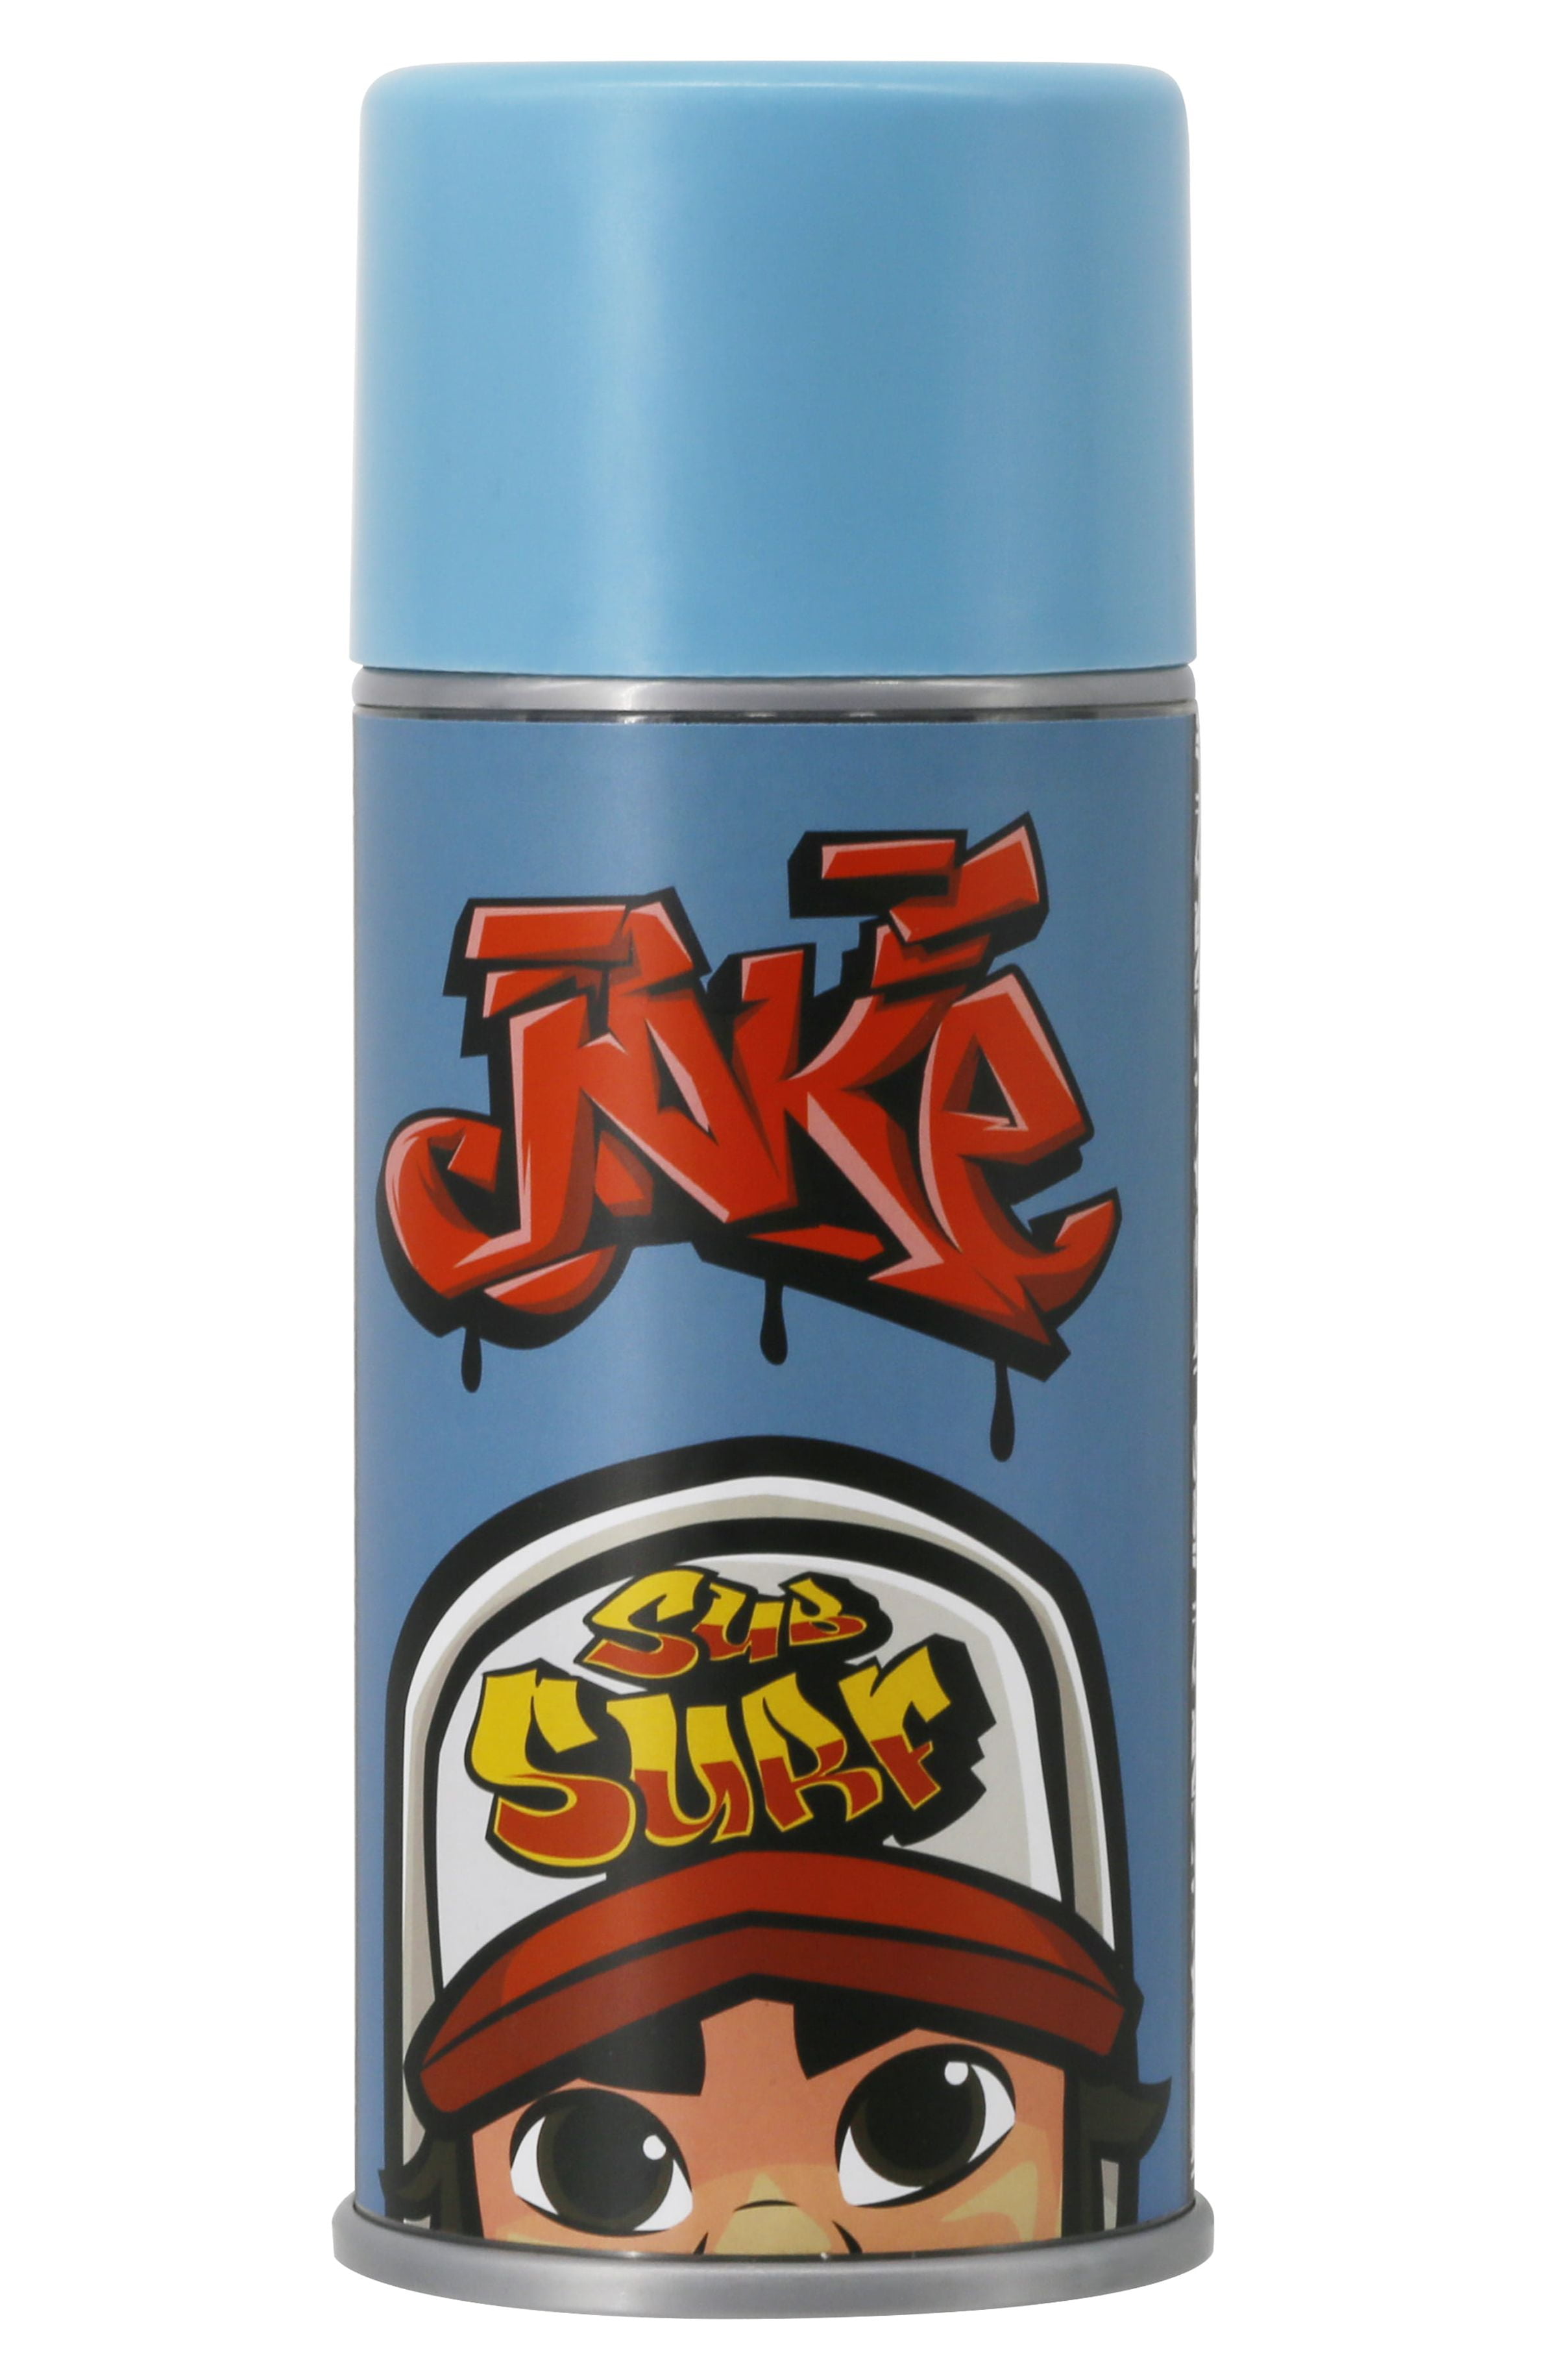 Subway Surfers Spray Crew Jake Blue Can With 4 inch Figure Inside